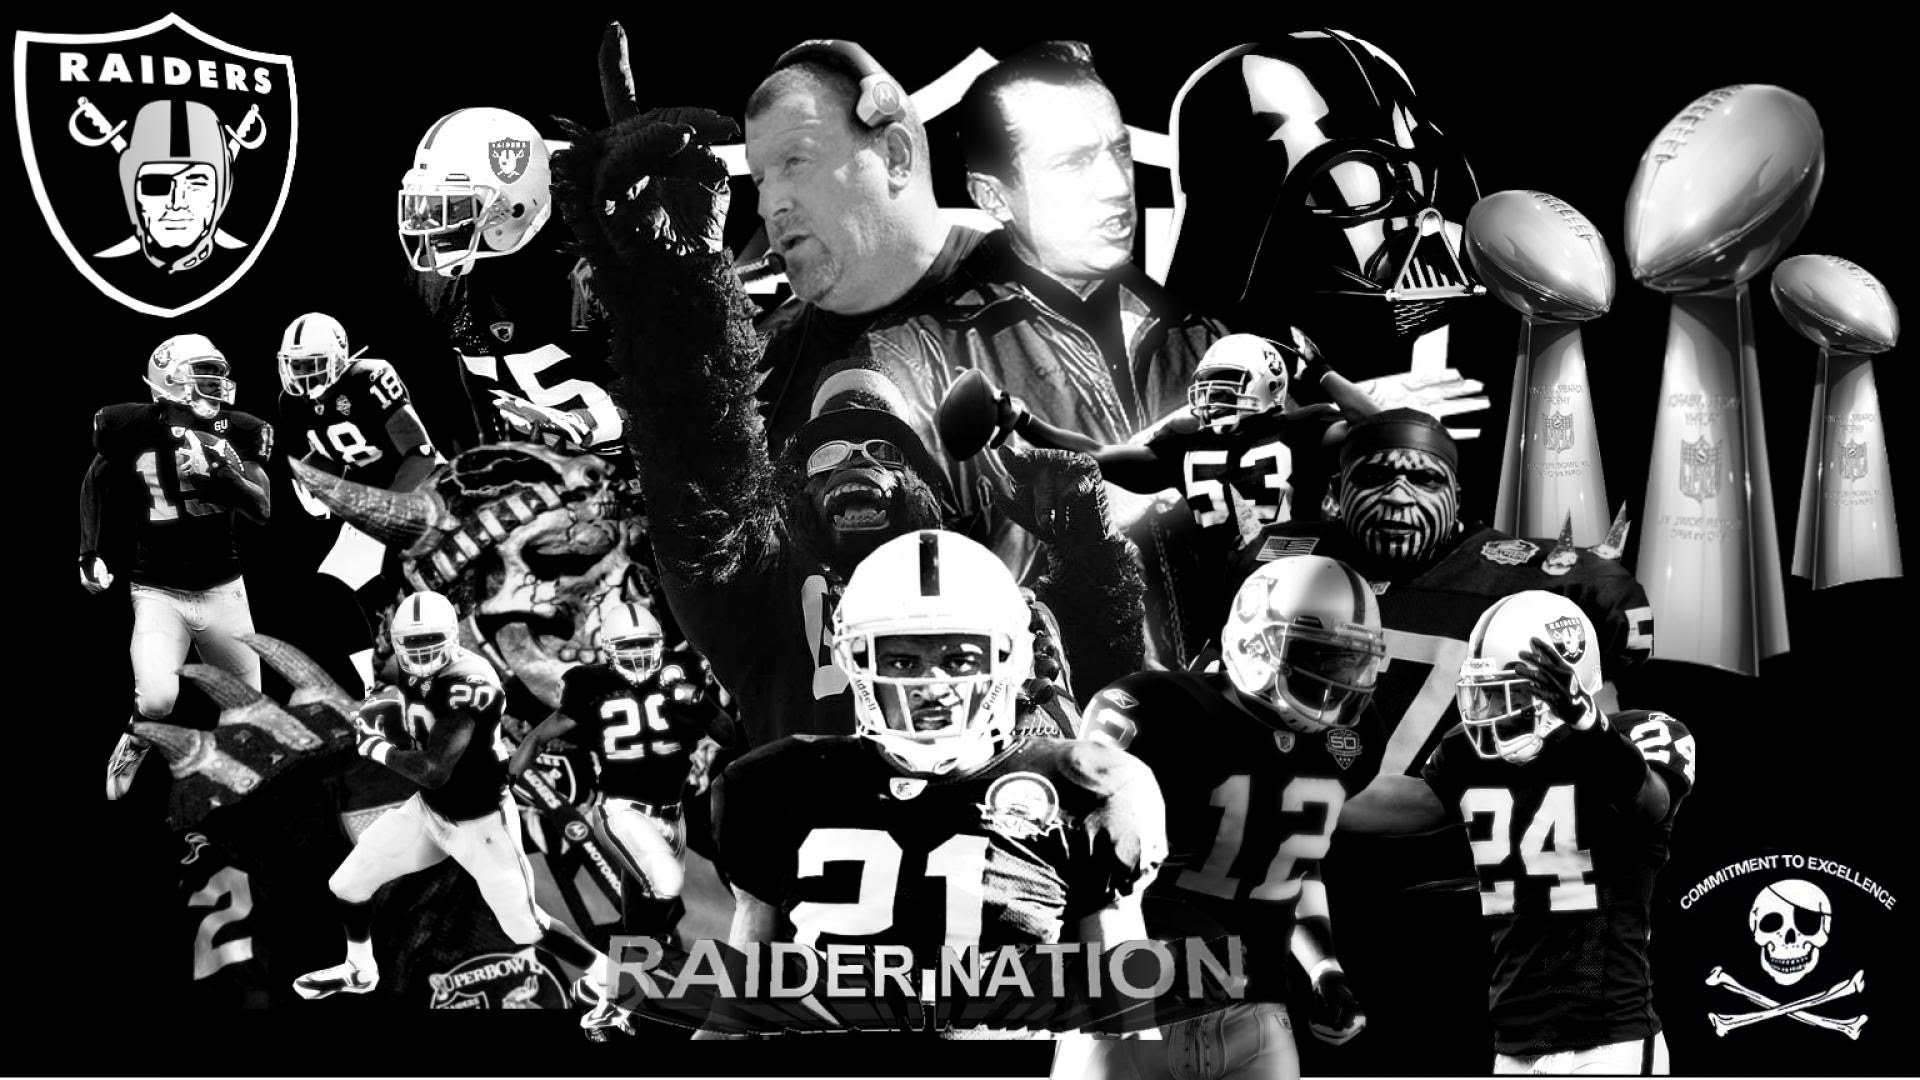 1920x1080 Oakland Raiders Resurgence- The Black And Silver Are Back